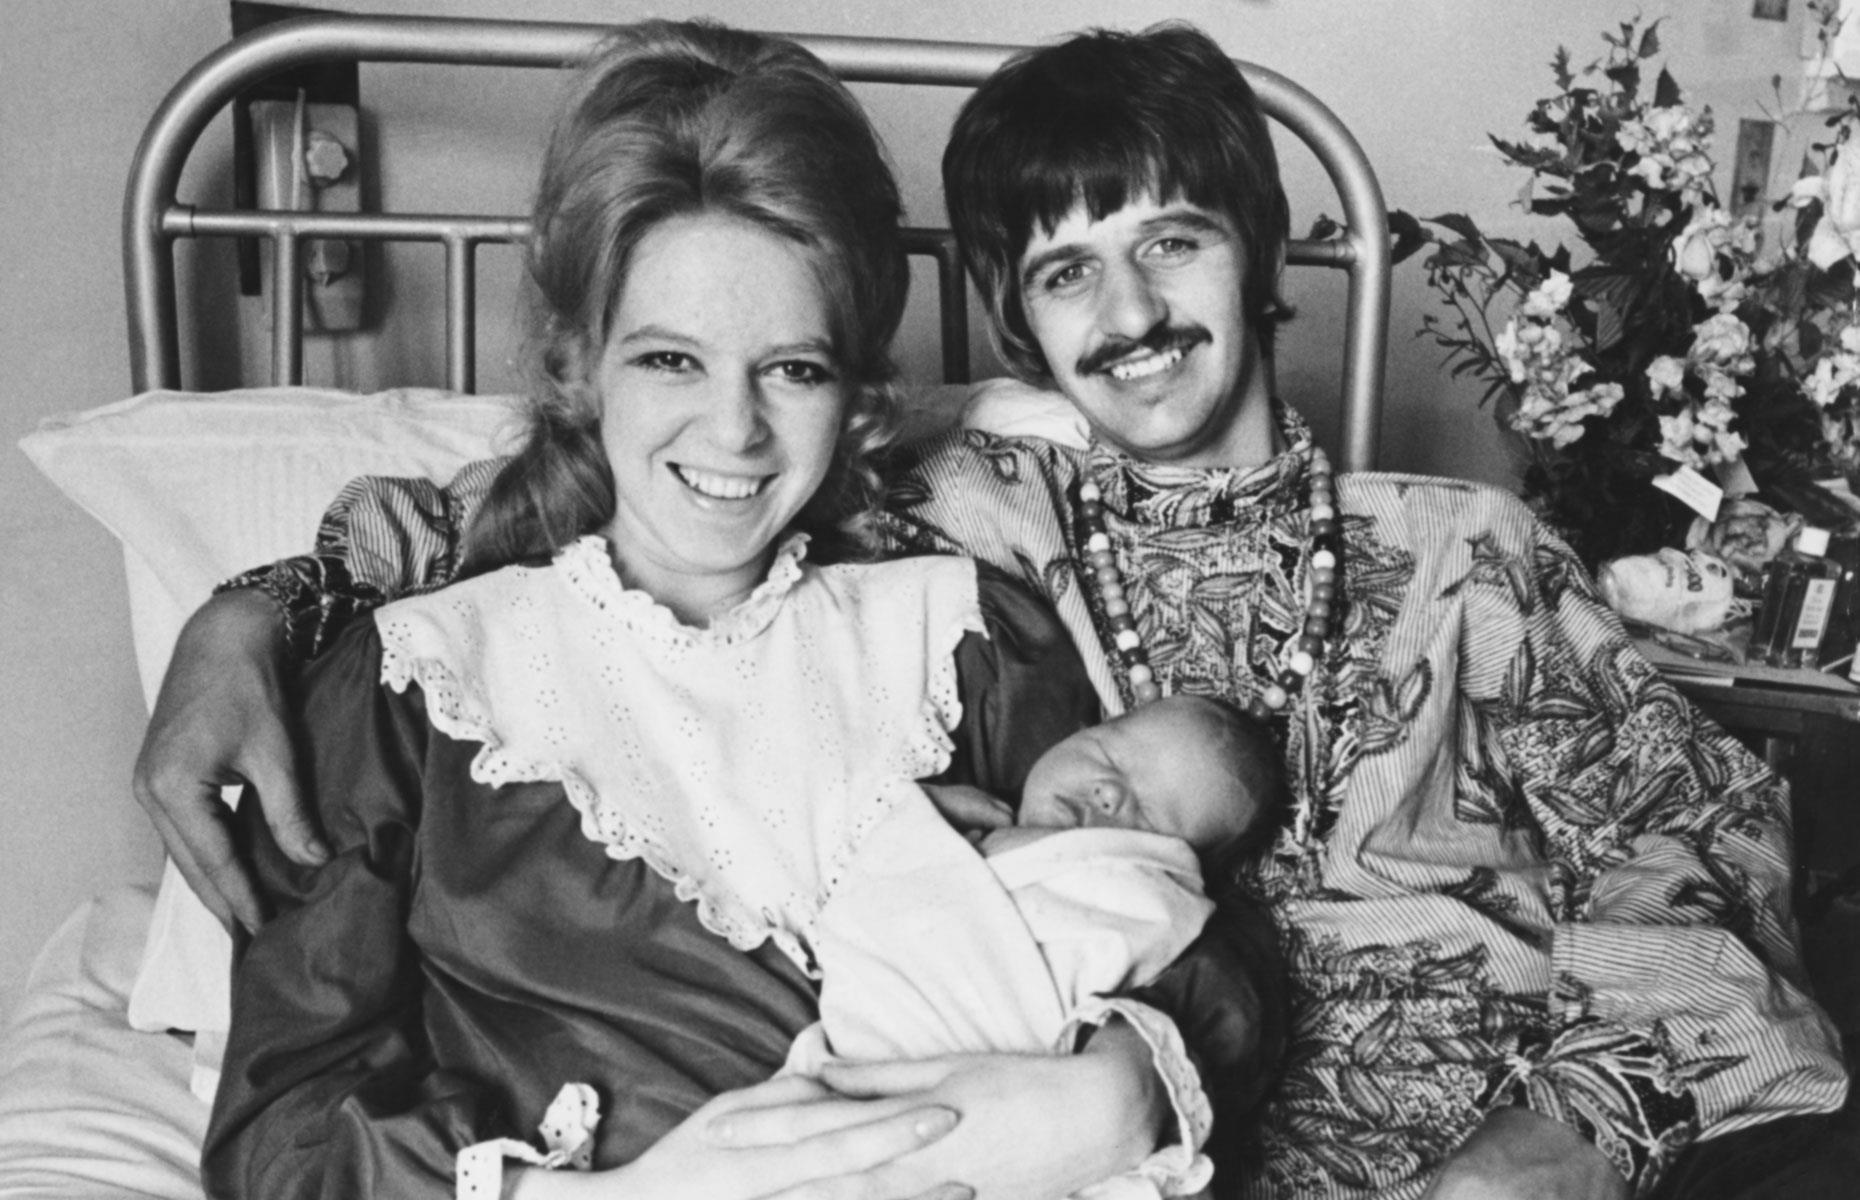 <p>The second child of Ringo Starr and Maureen Cox, Jason Starkey was born in 1967.</p>  <p>Following a wayward youth that saw him have several run-ins with the law, Jason played drums for a number of bands and became a road manager and photographer. He's married to designer Flora Evans Starkey and the couple have four children together. </p>